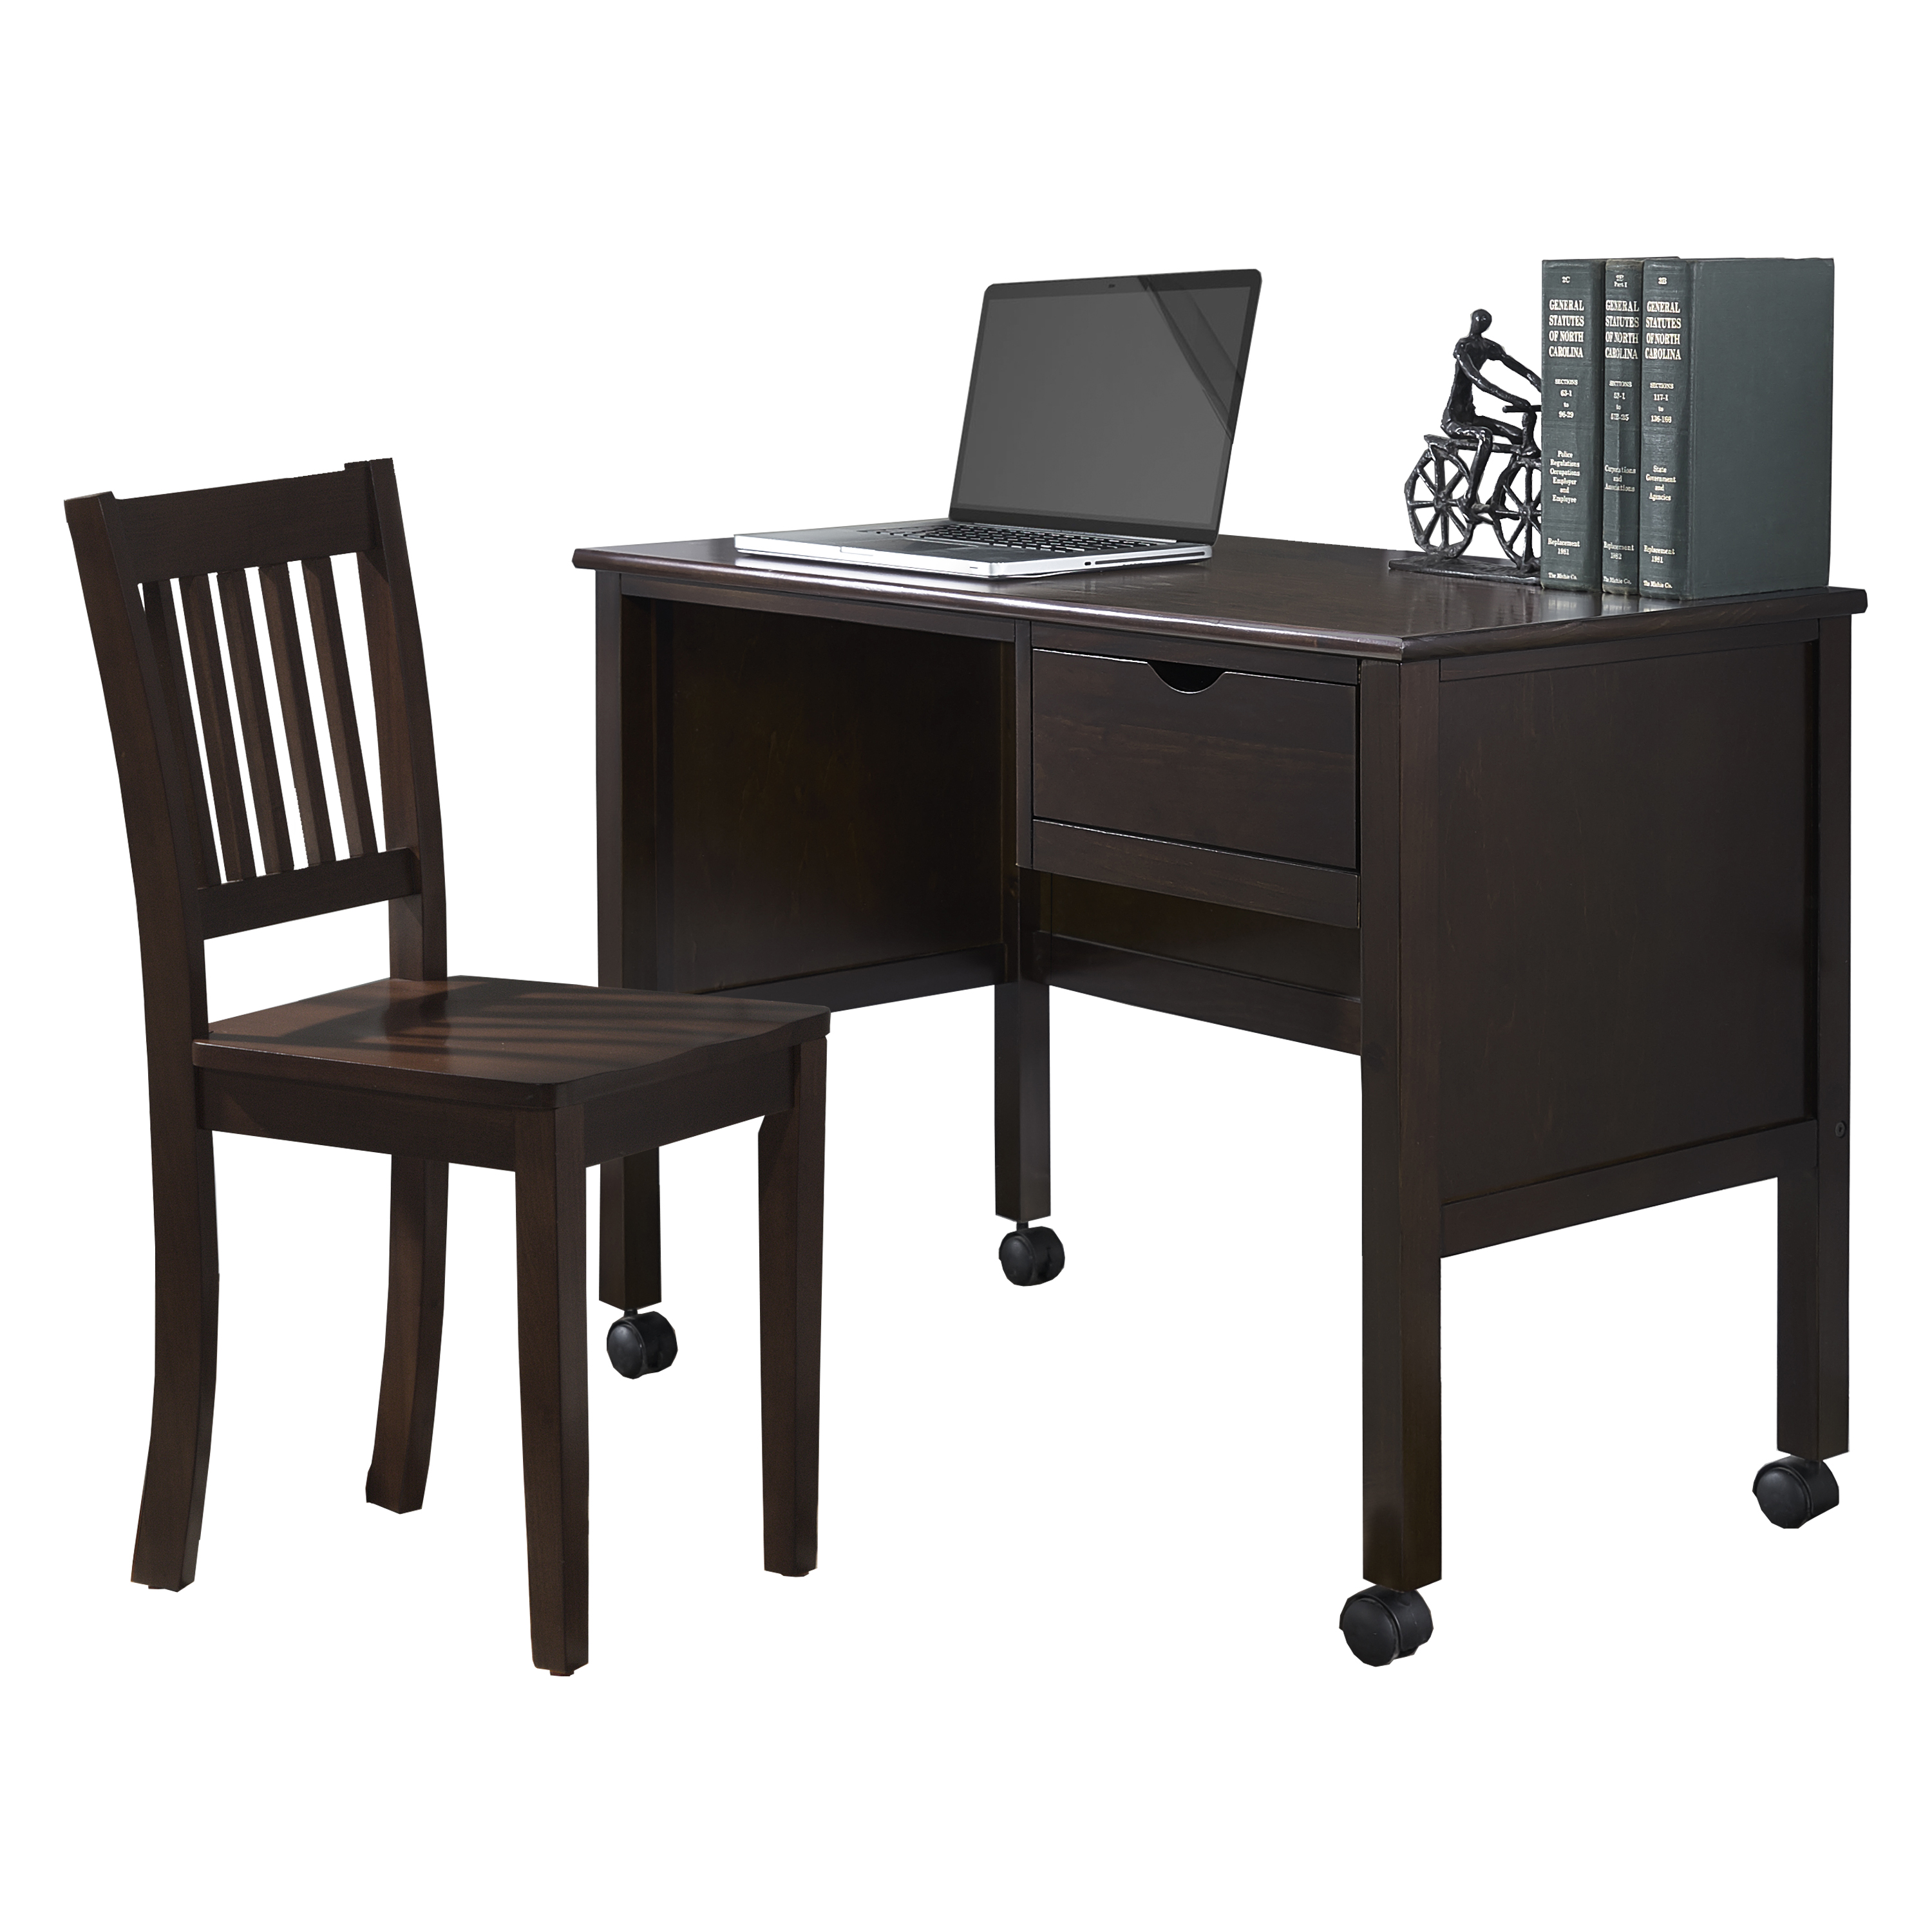 Schoolhouse 4.0 Desk and Chair